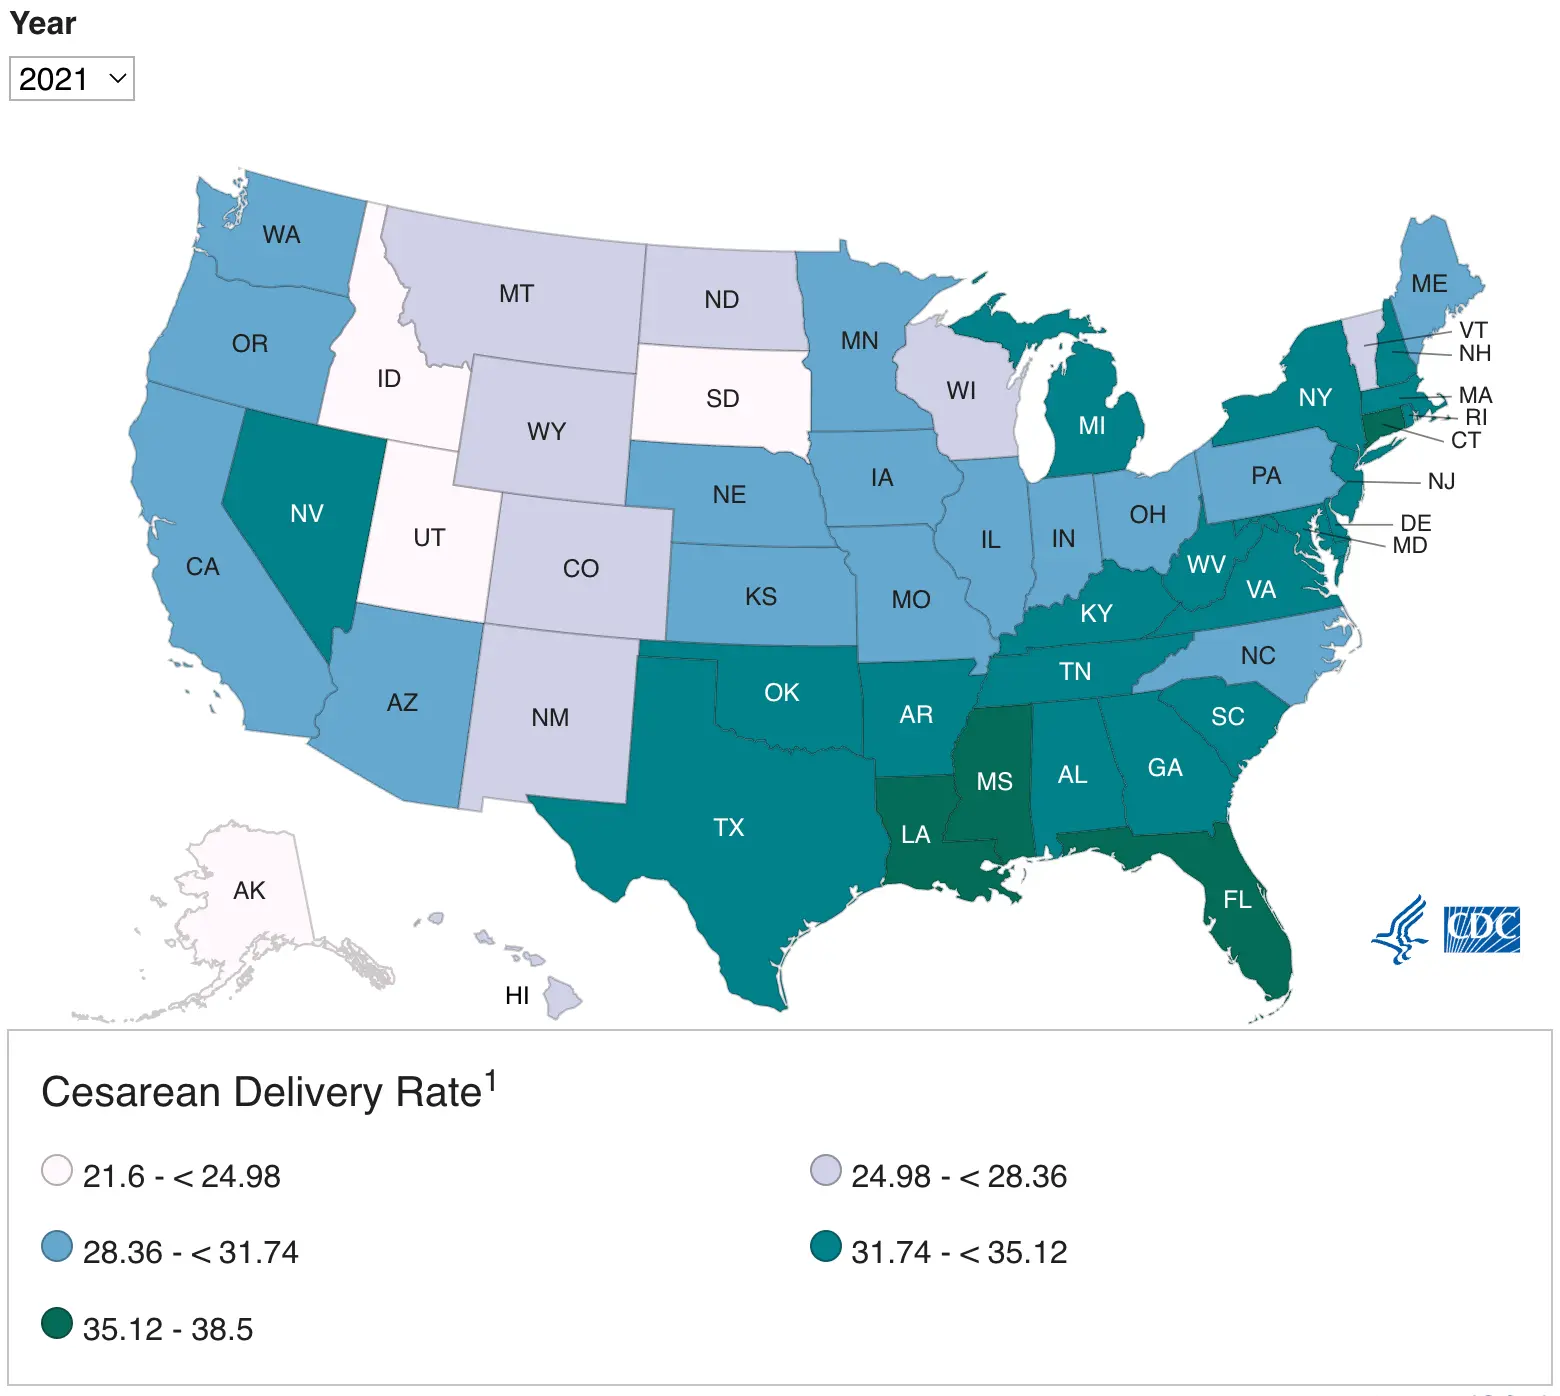 Info graphic of USA states showing % of births via cesarean in 2021